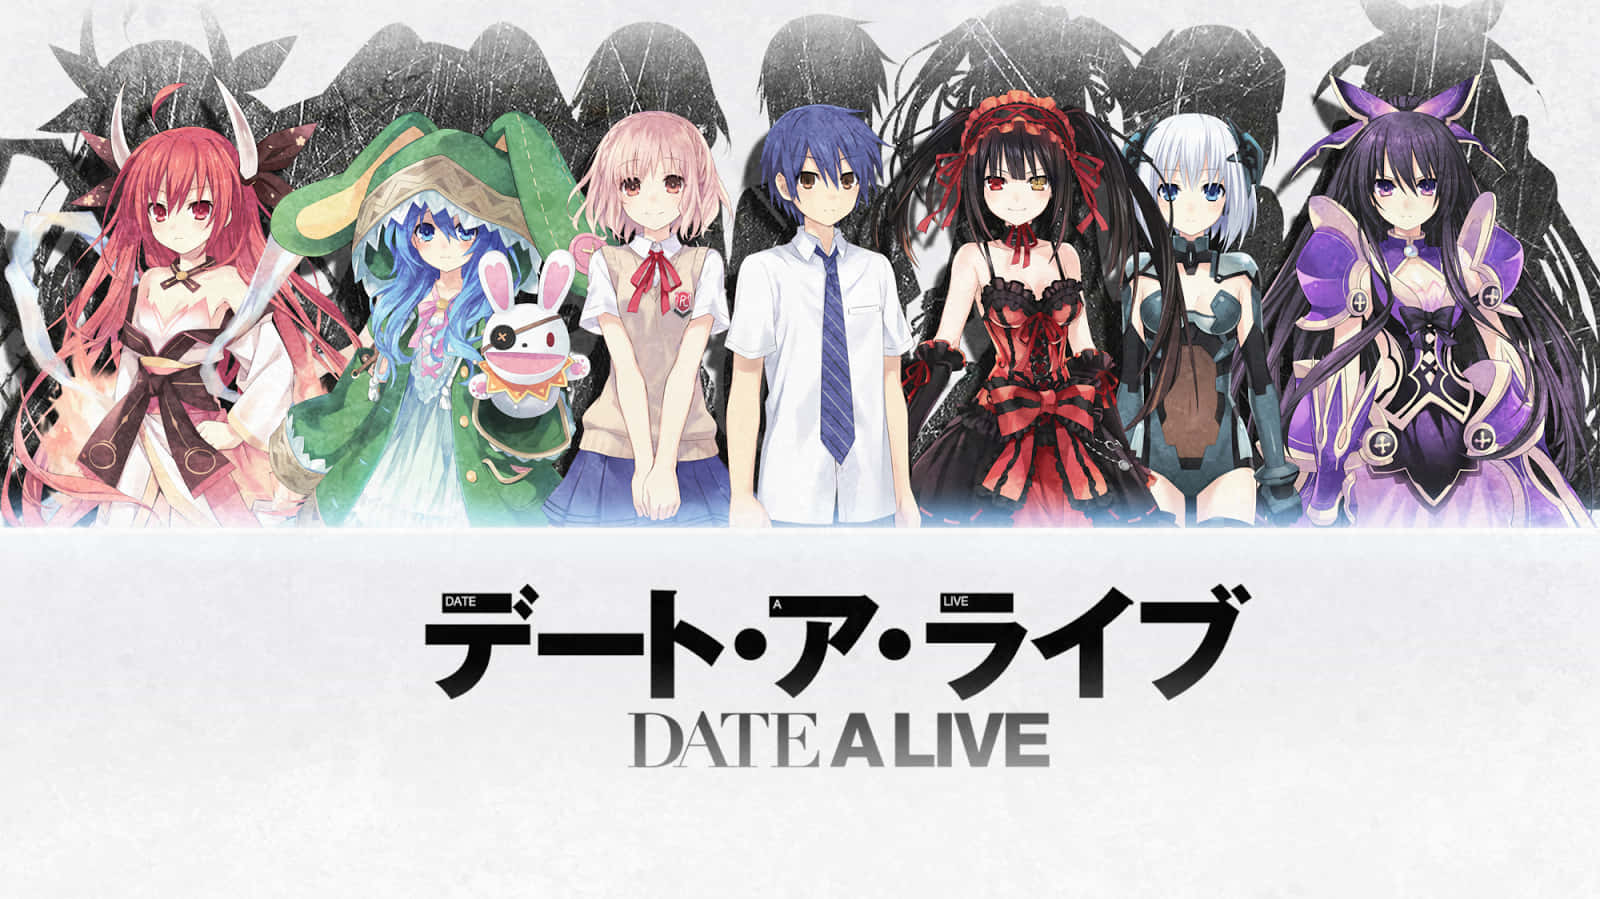 “Join Kurumi and the rest of the crew on the Fun-filled adventure of Date A Live!” Wallpaper